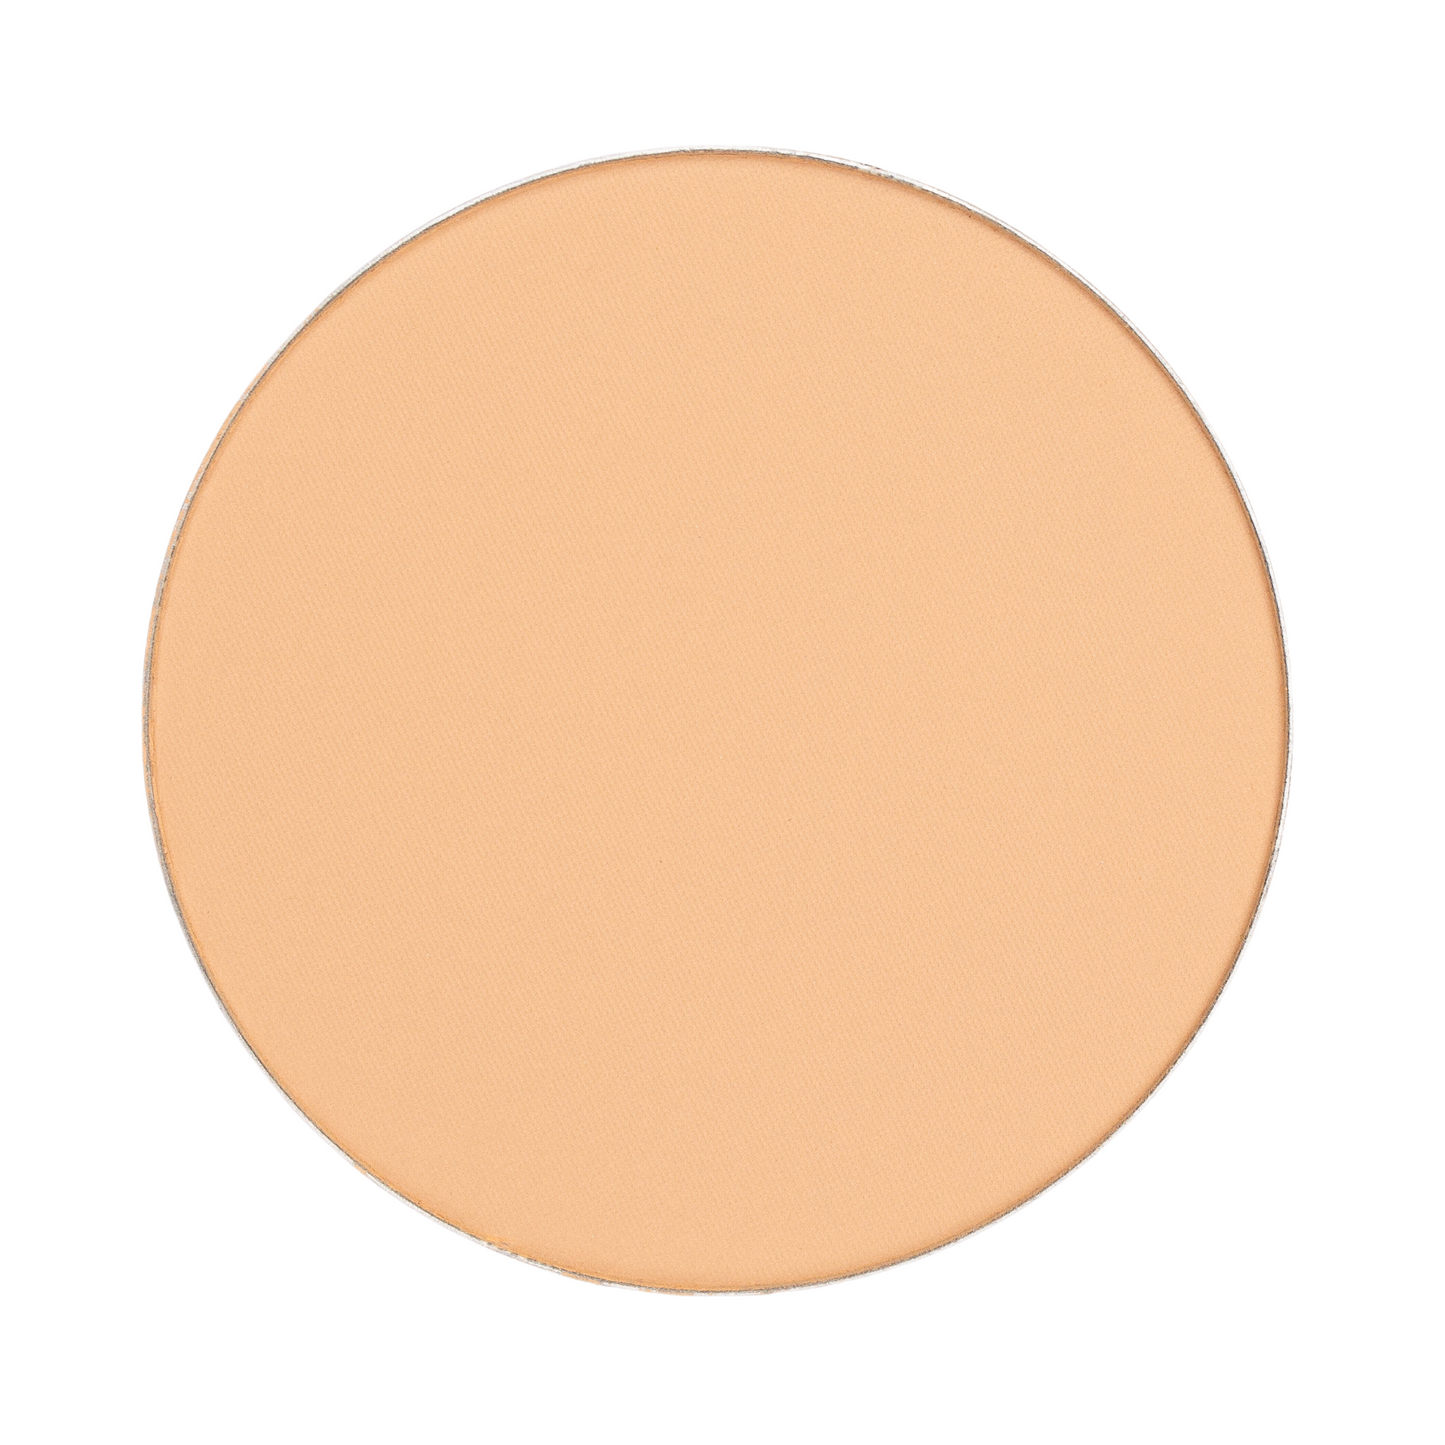 Sheer Matte Pressed Mineral Foundation - Very Fair - Compact